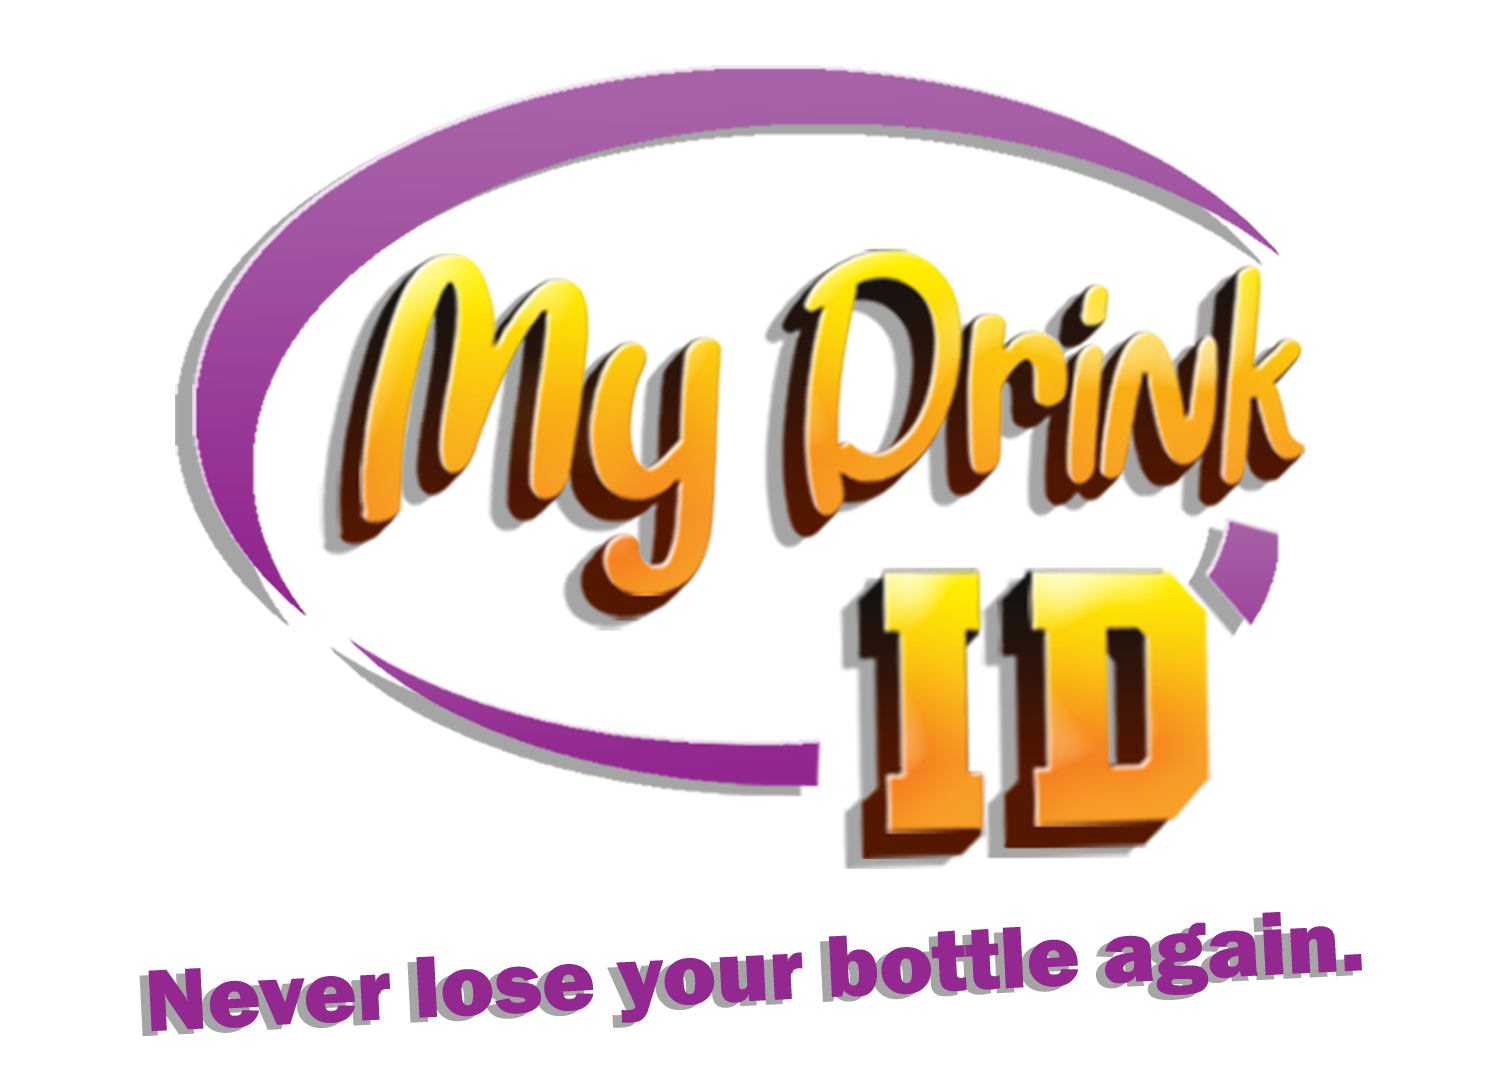 mydrinkid never lose your bottle again